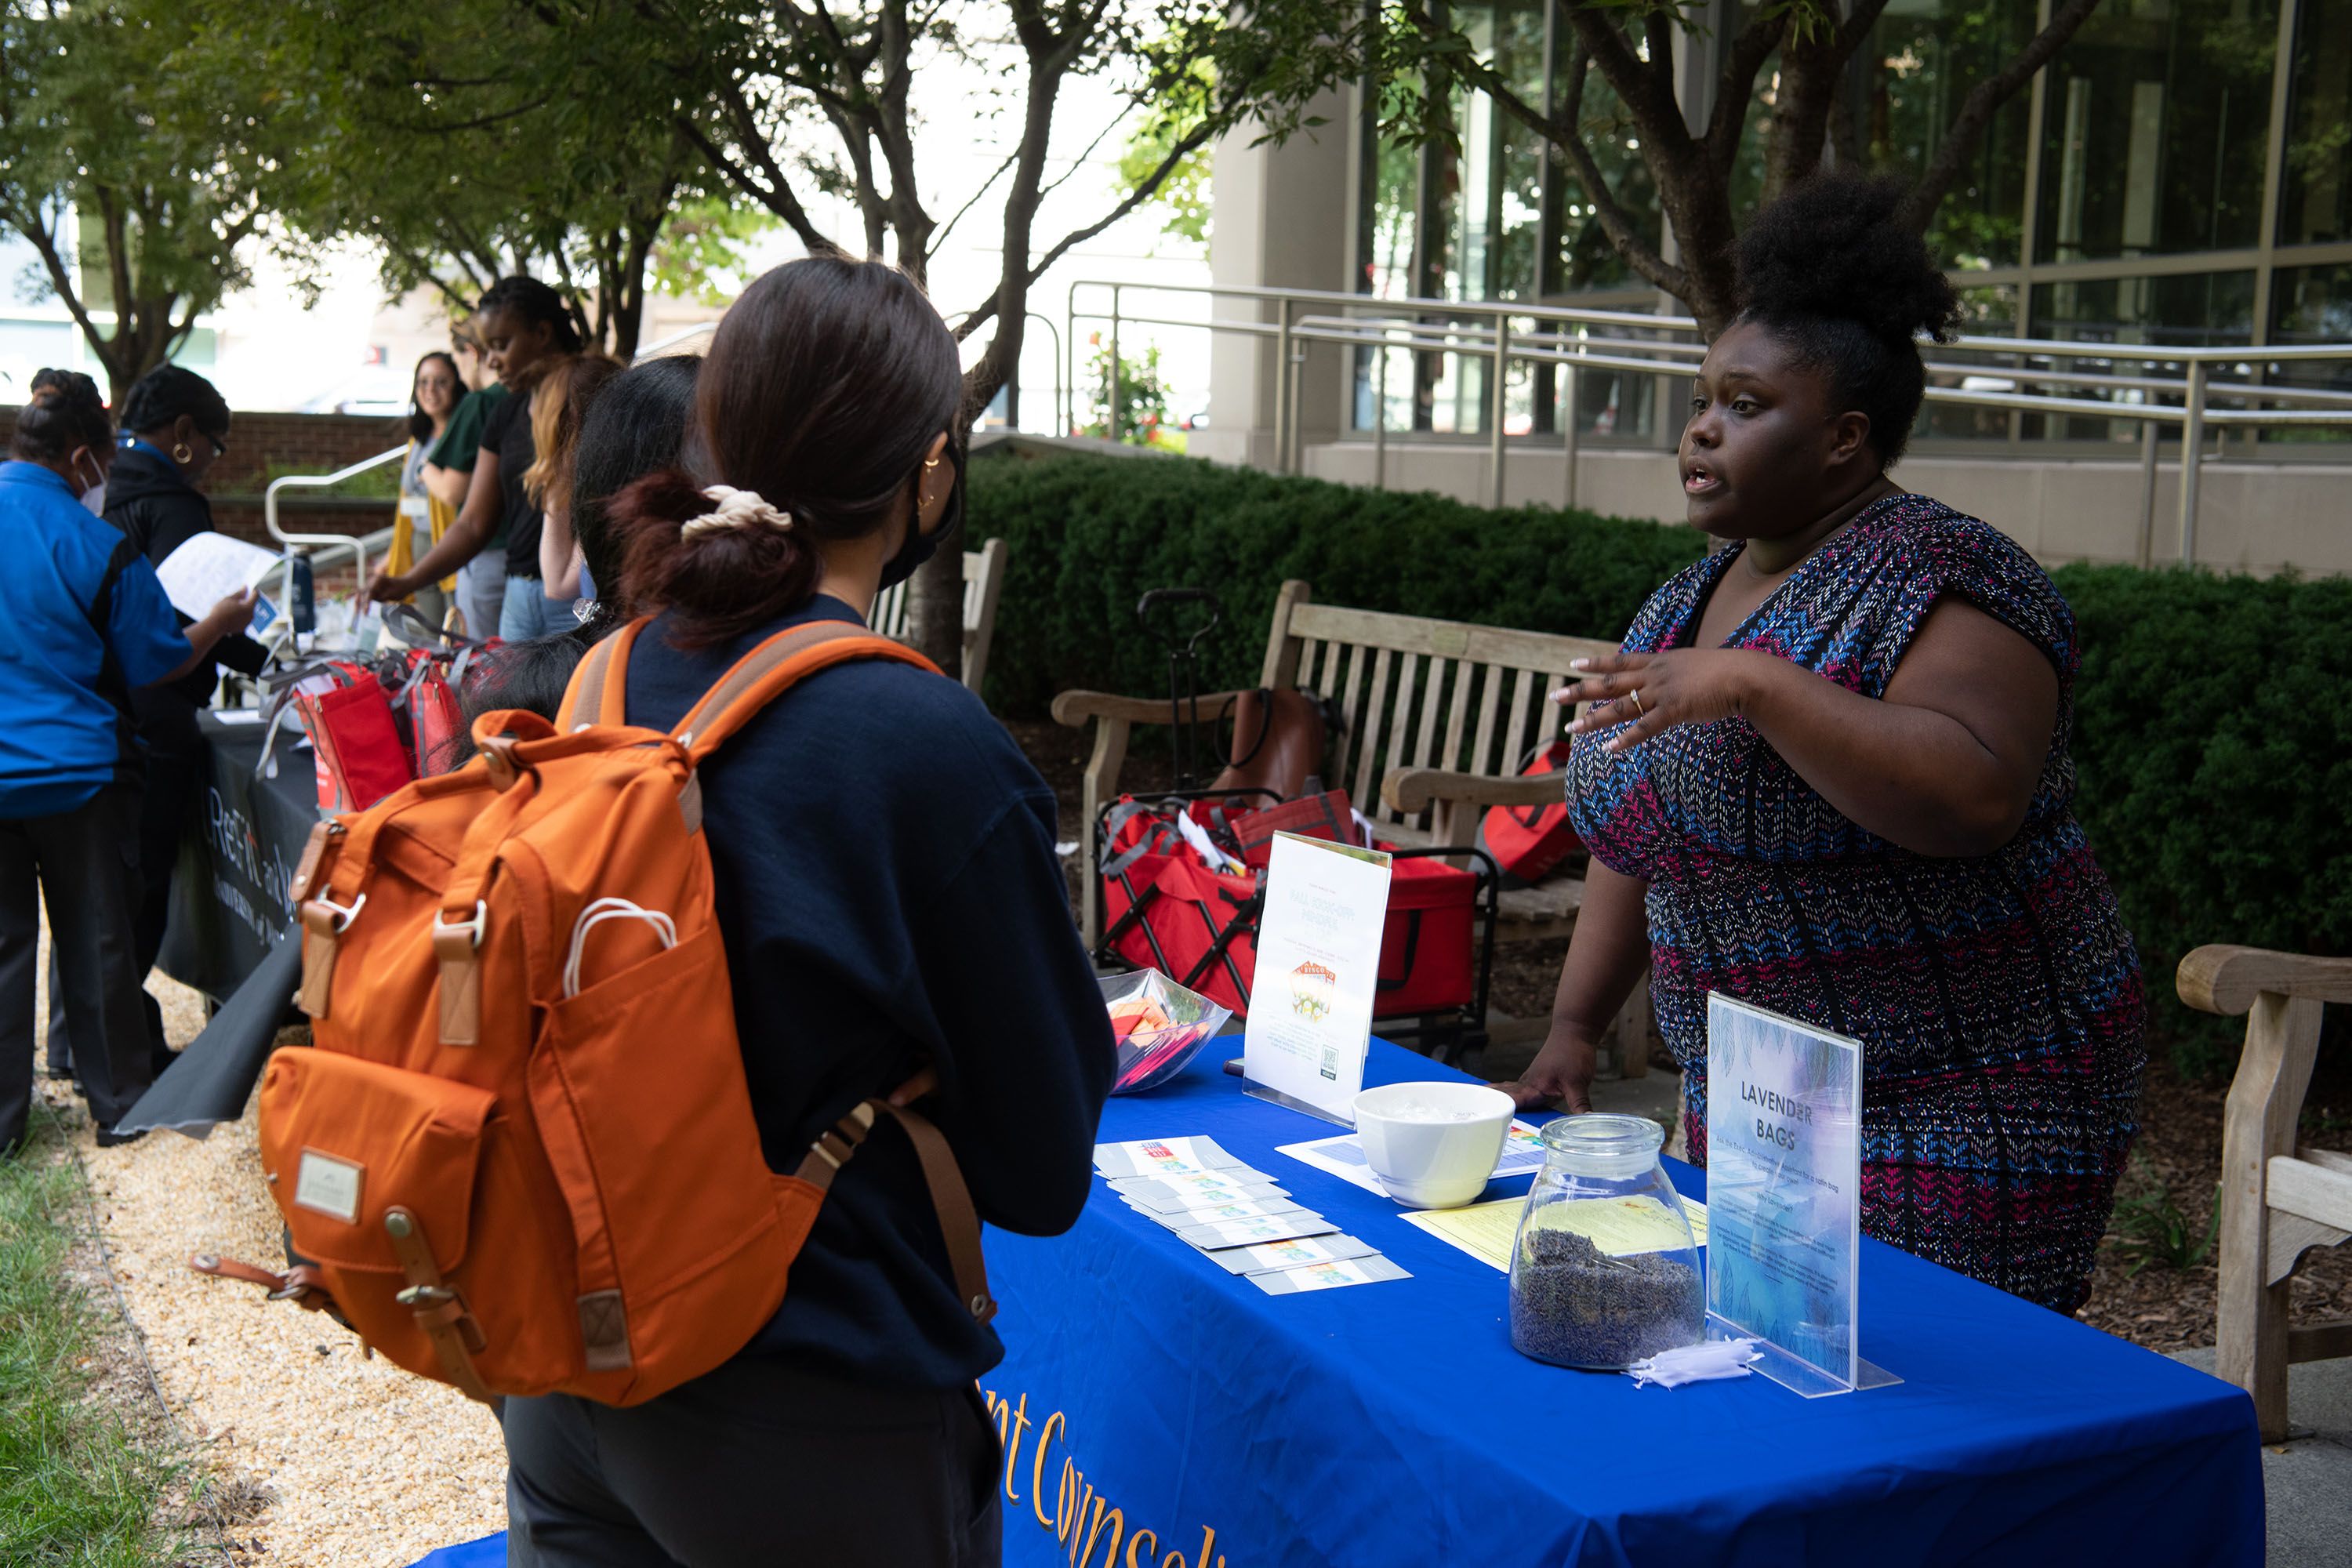 Tierra Major Kearney, senior referral and prevention specialist in the Student Counseling Center speaks to students during an outdoor outreach event